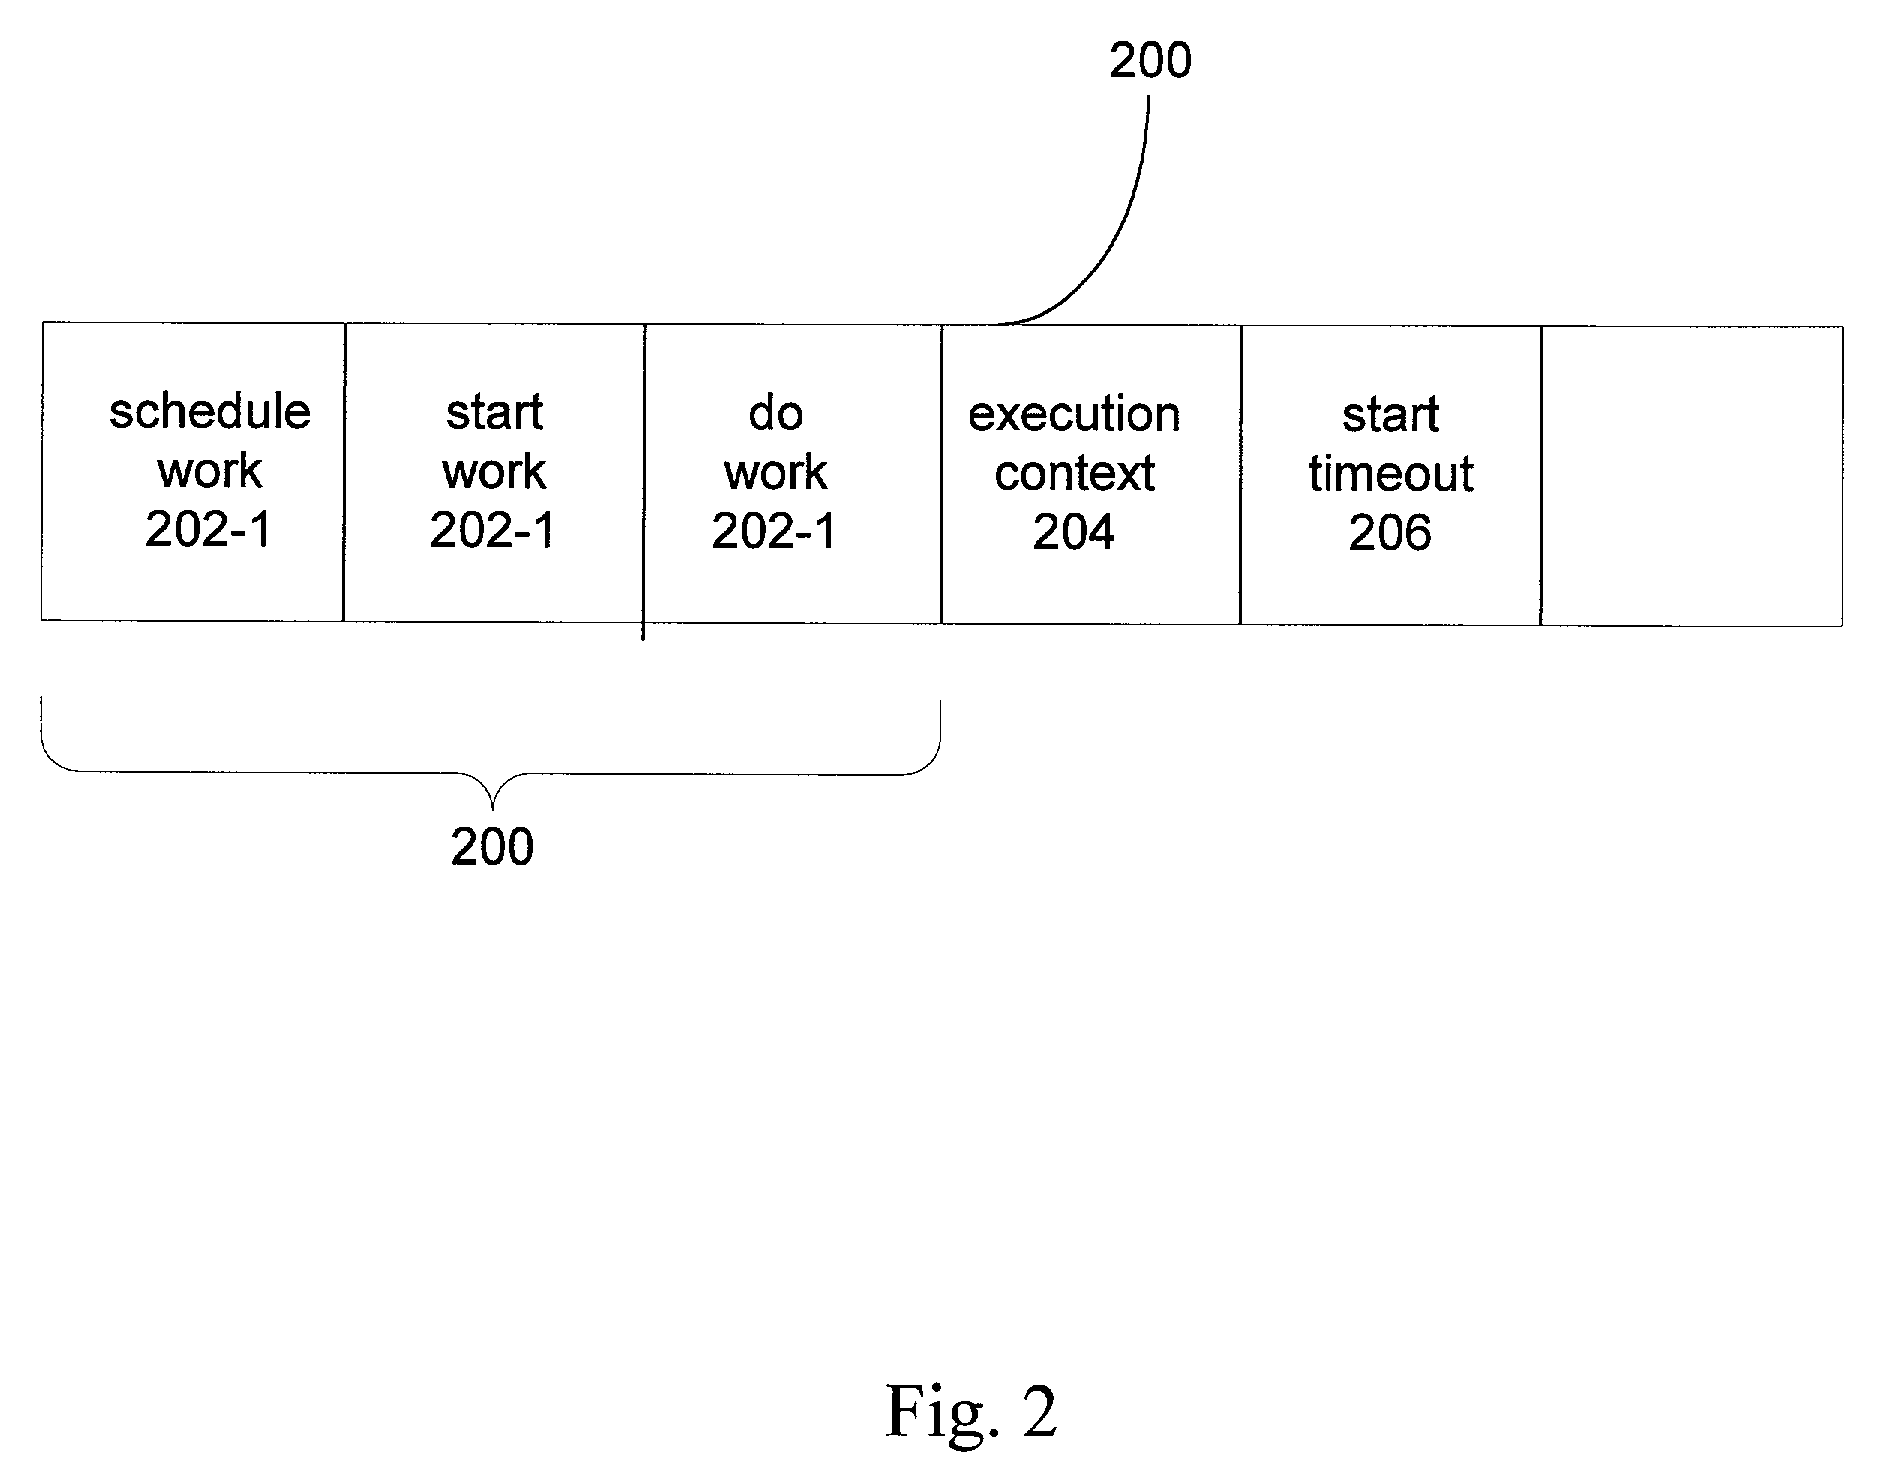 Callback event listener mechanism for resource adapter work executions performed by an application server thread